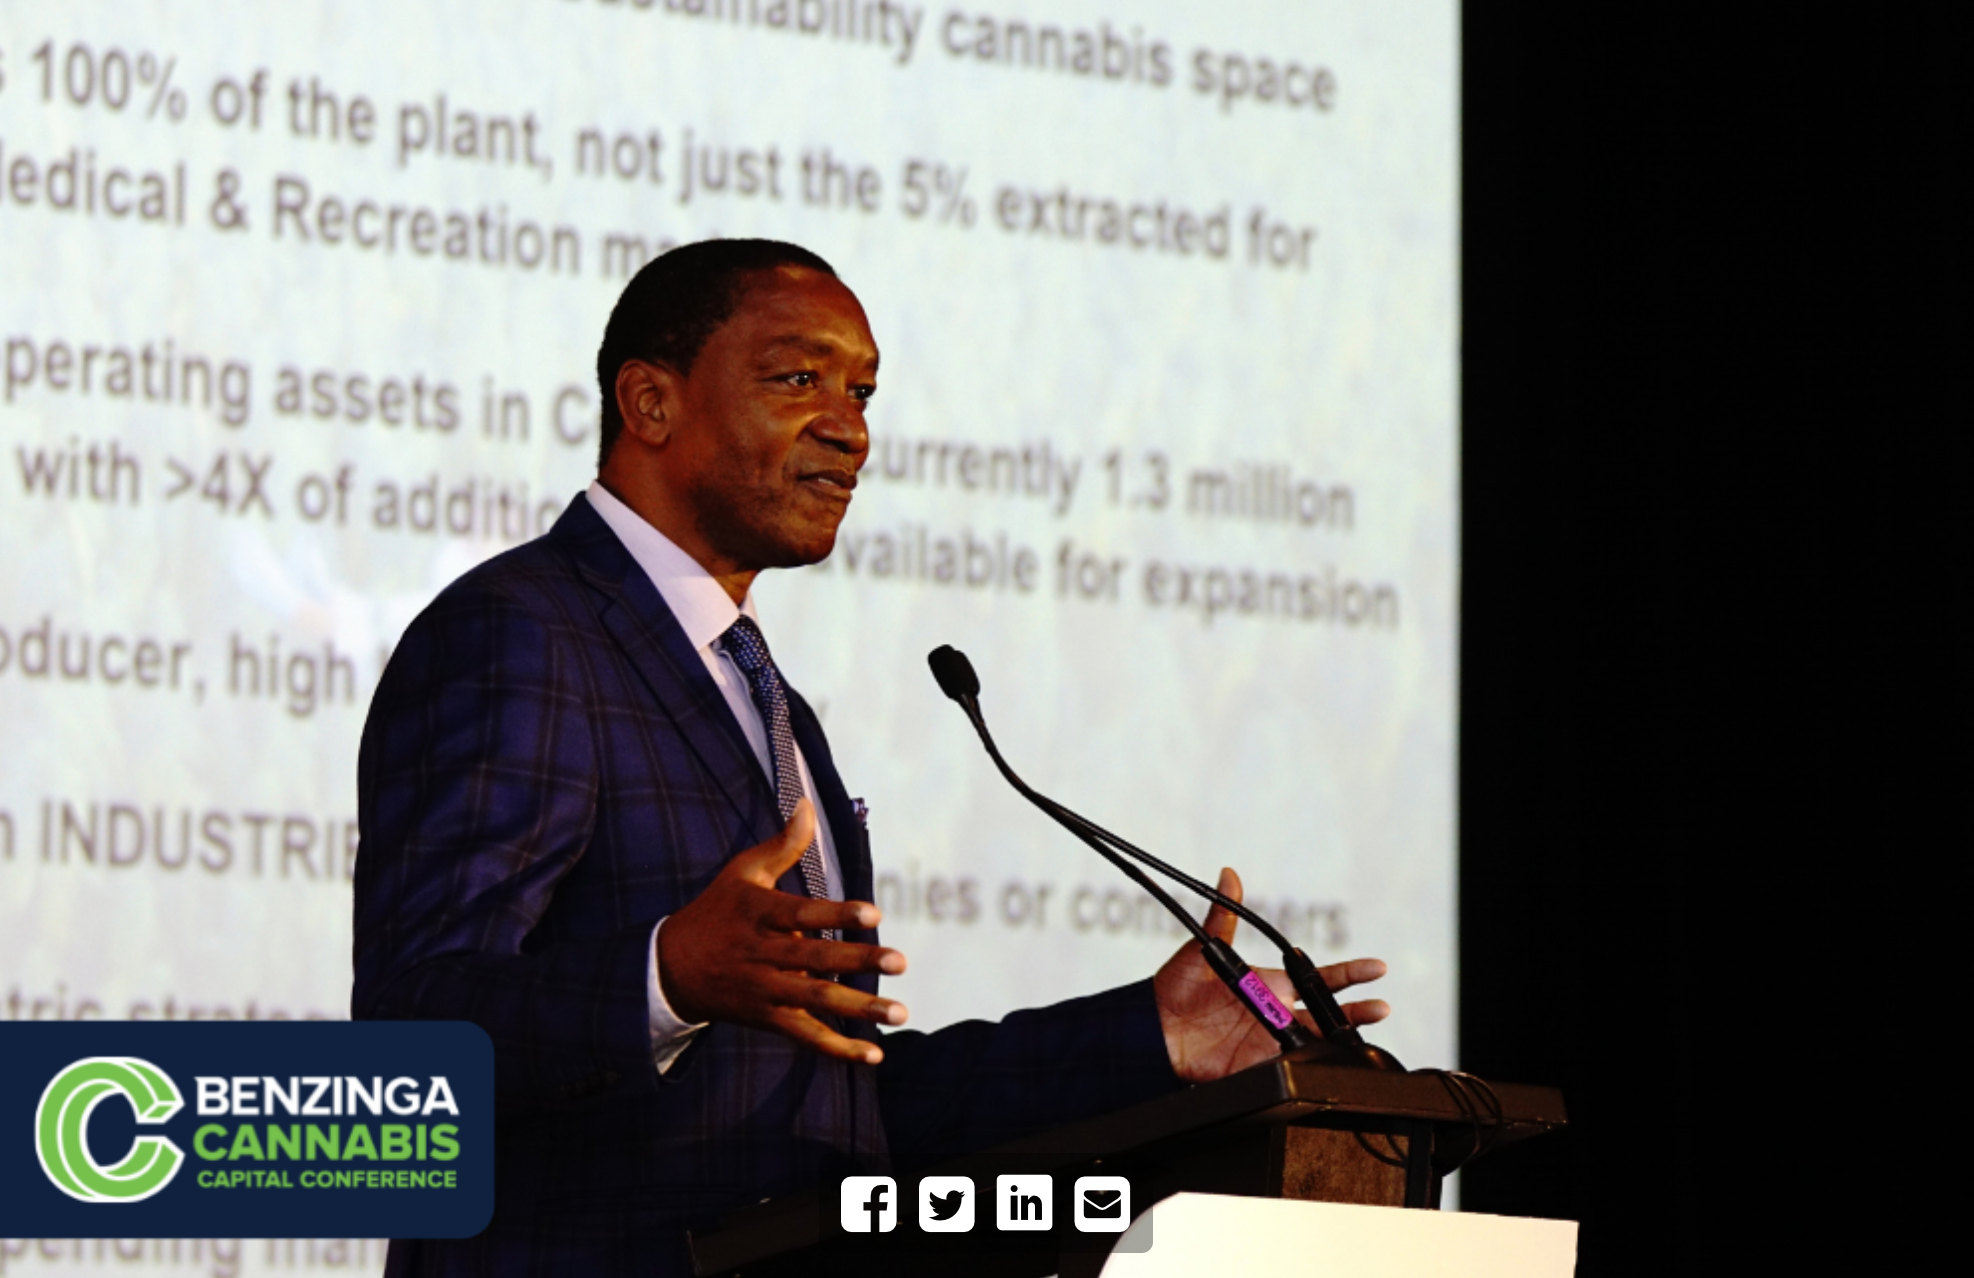 This 12-Time NBA All-Star Is Making Autoparts With Plants, Predicts 'All Plastics Will Be Made From Cannabis'